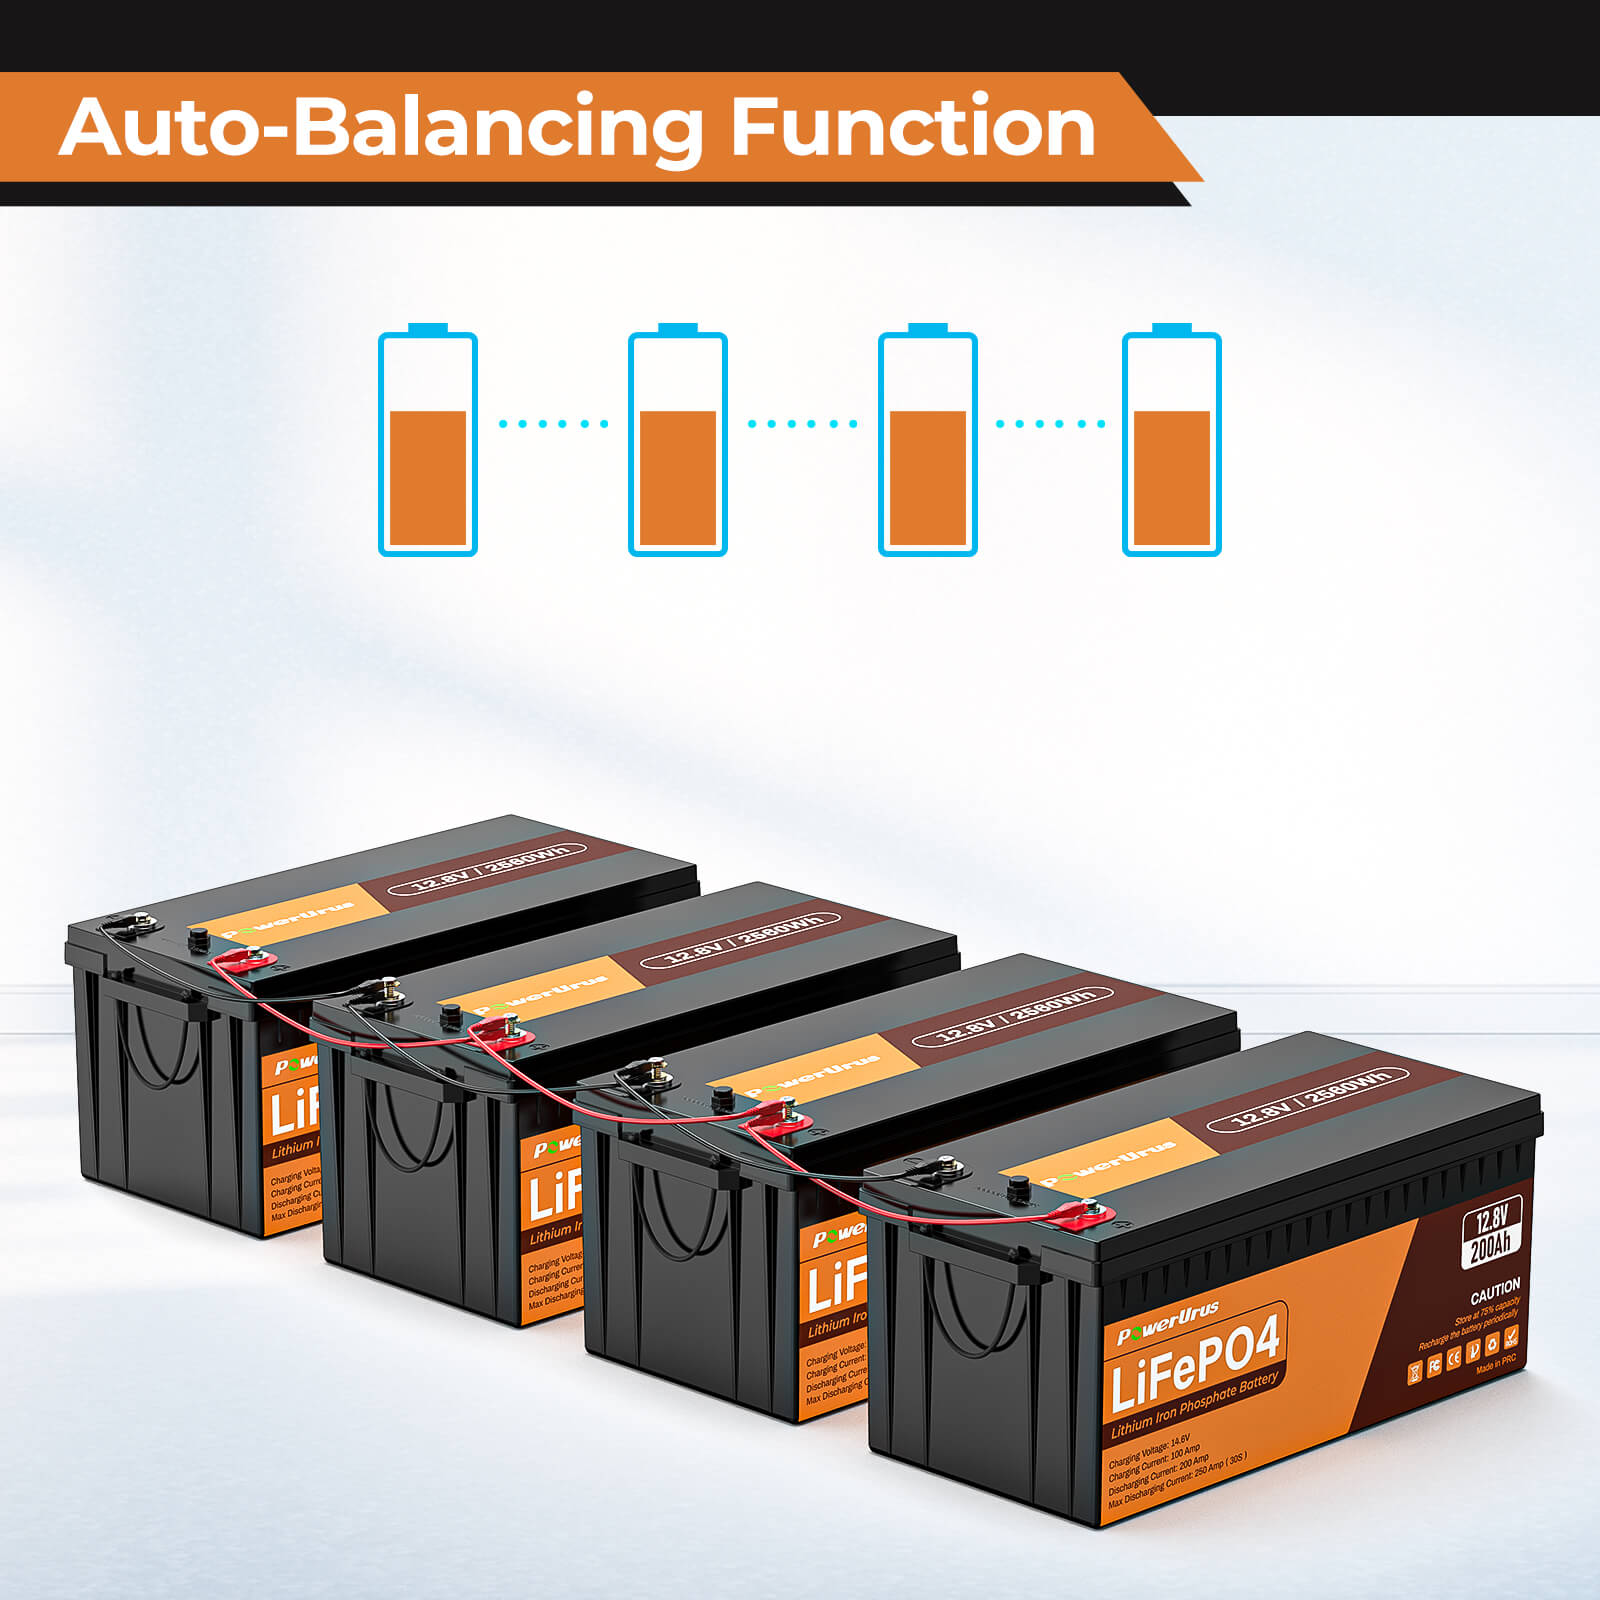 12v 200Ah LiFePO4 Battery Deep Cycle Lithium iron phosphate Rechargeable  Battery Built-in BMS Protect Charging and Discharging High Performance for